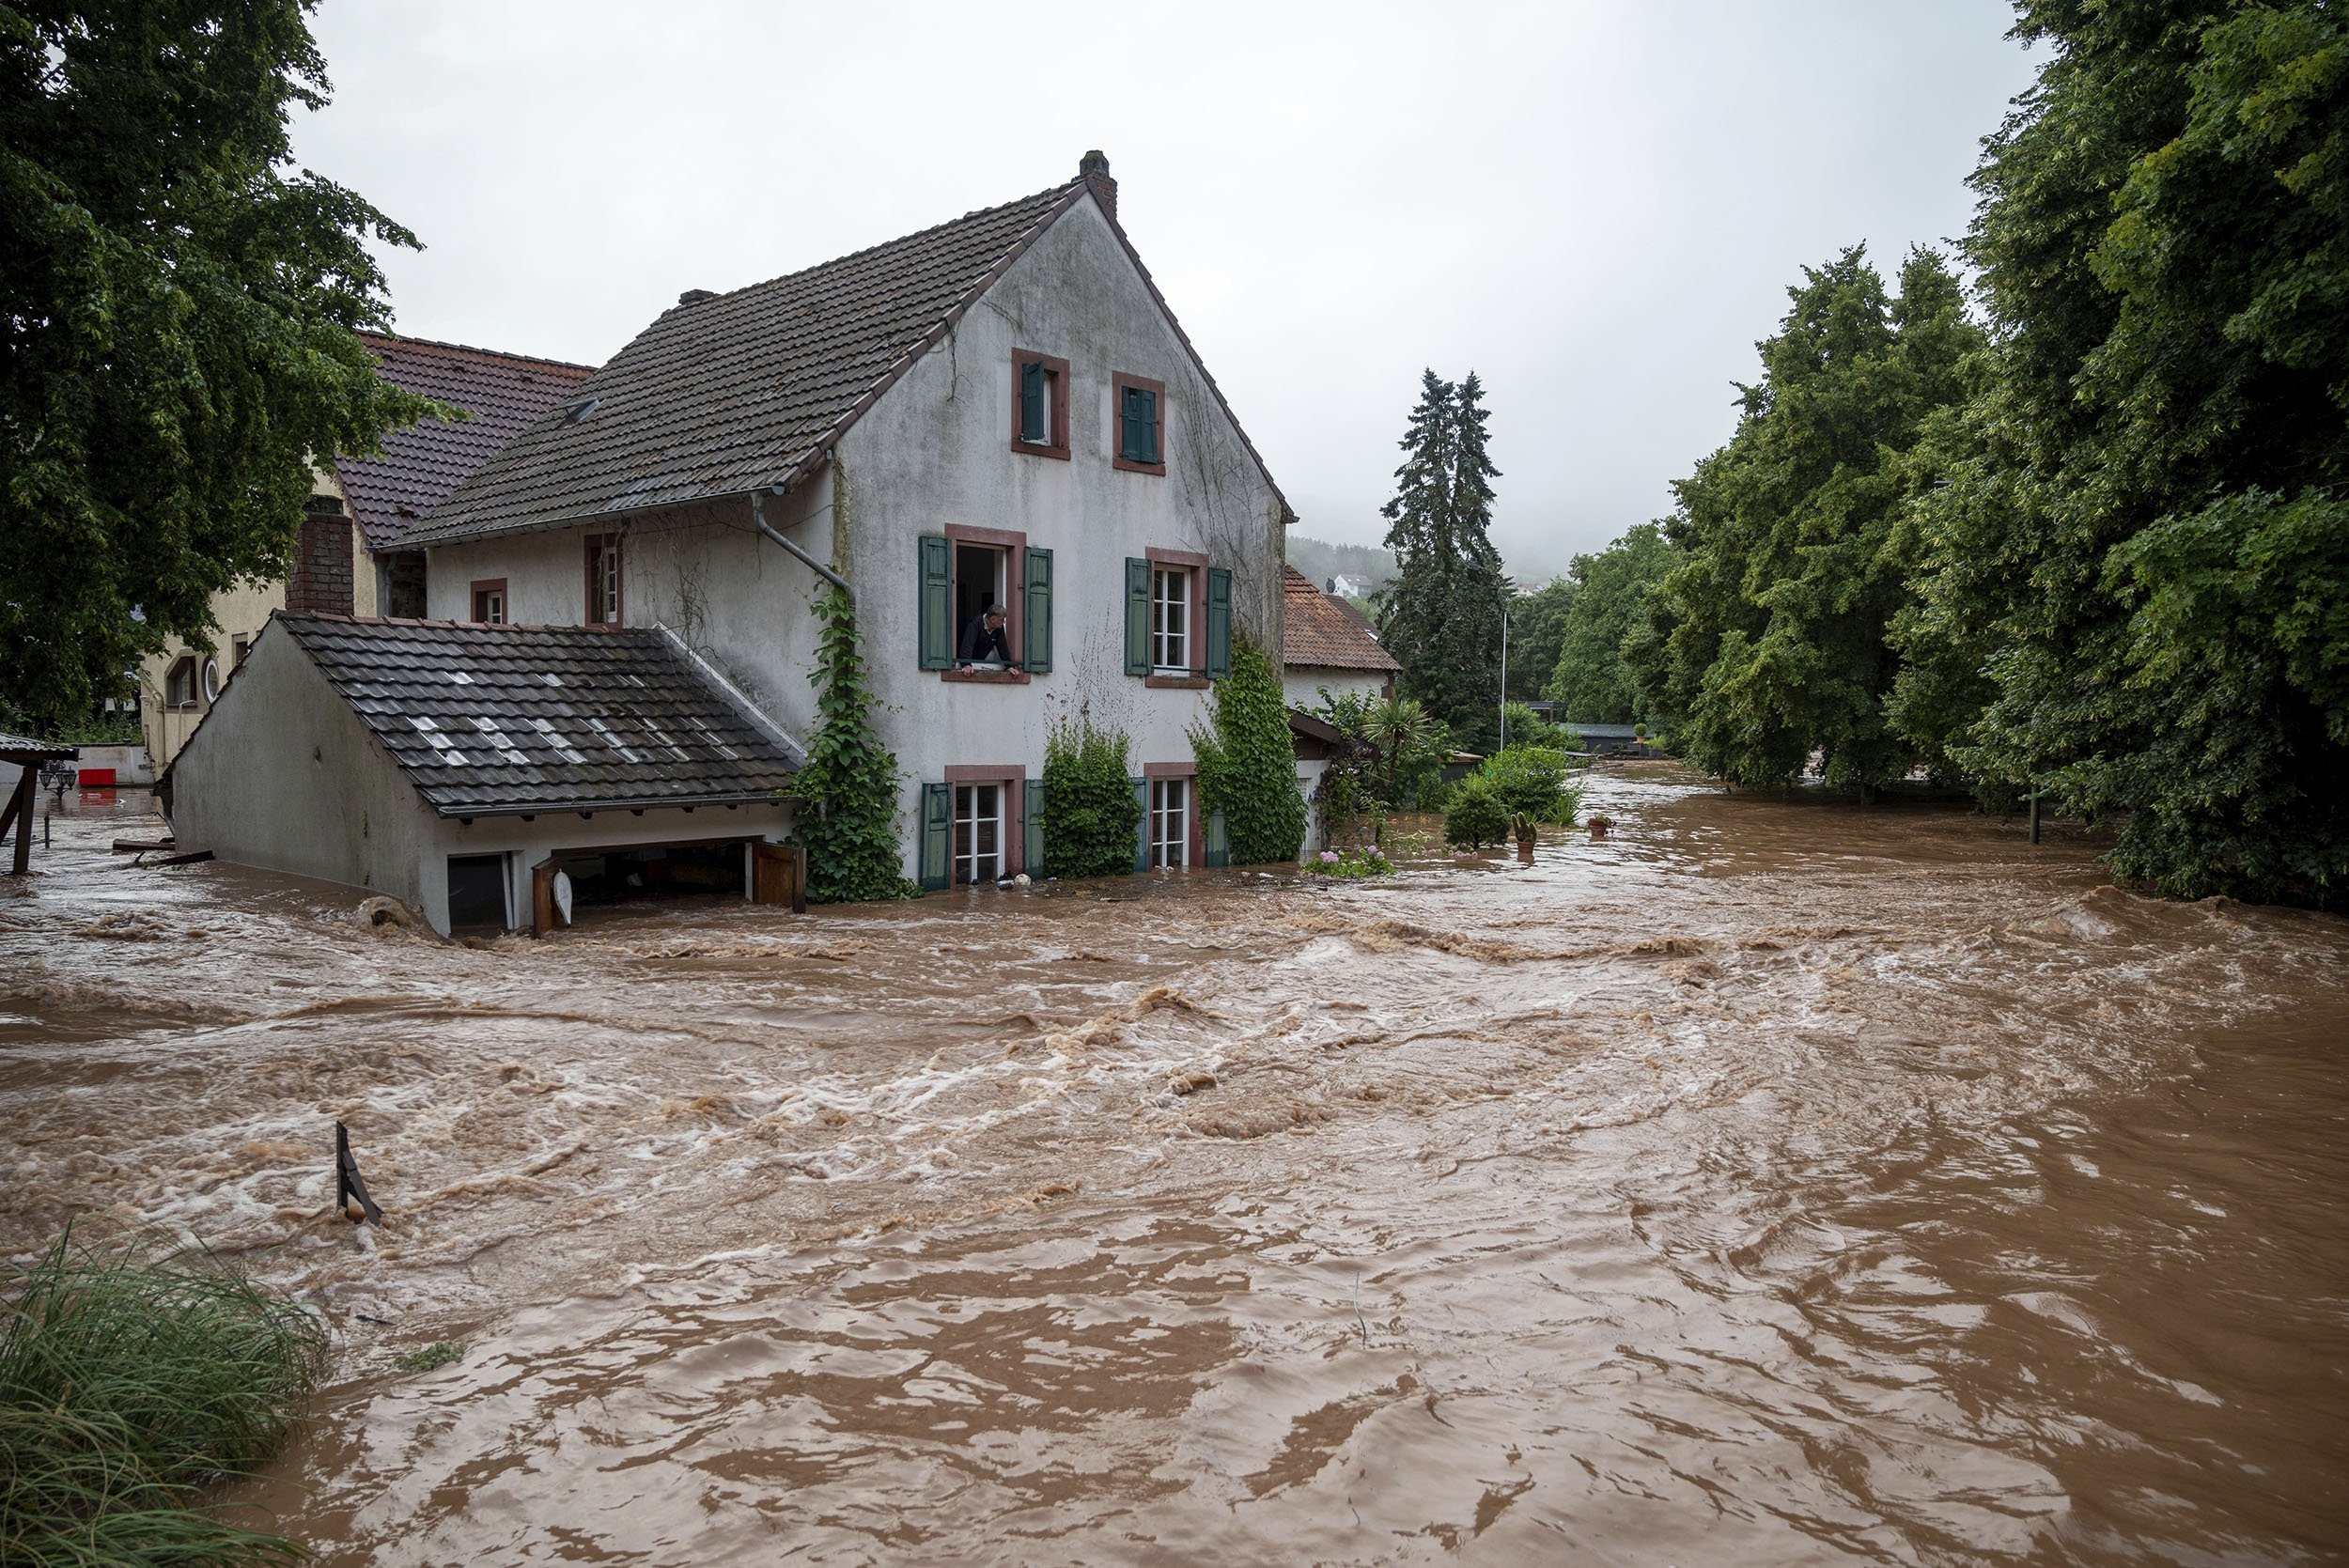 Victims of Floods in Western Europe Rises to 118